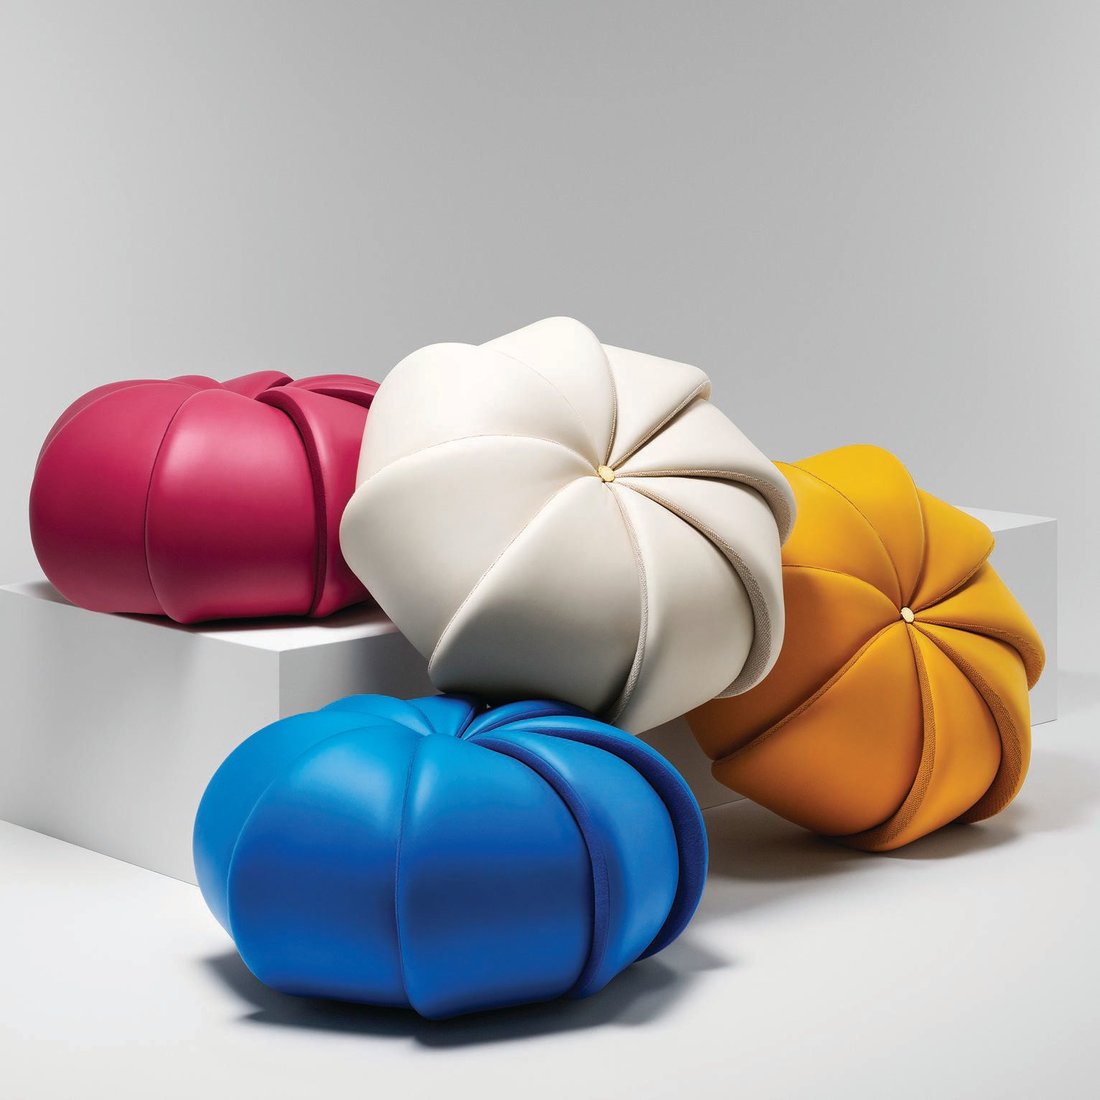 Louis Vuitton's Objets Nomades Collection Nods To The House's  Forward-Thinking Heritage